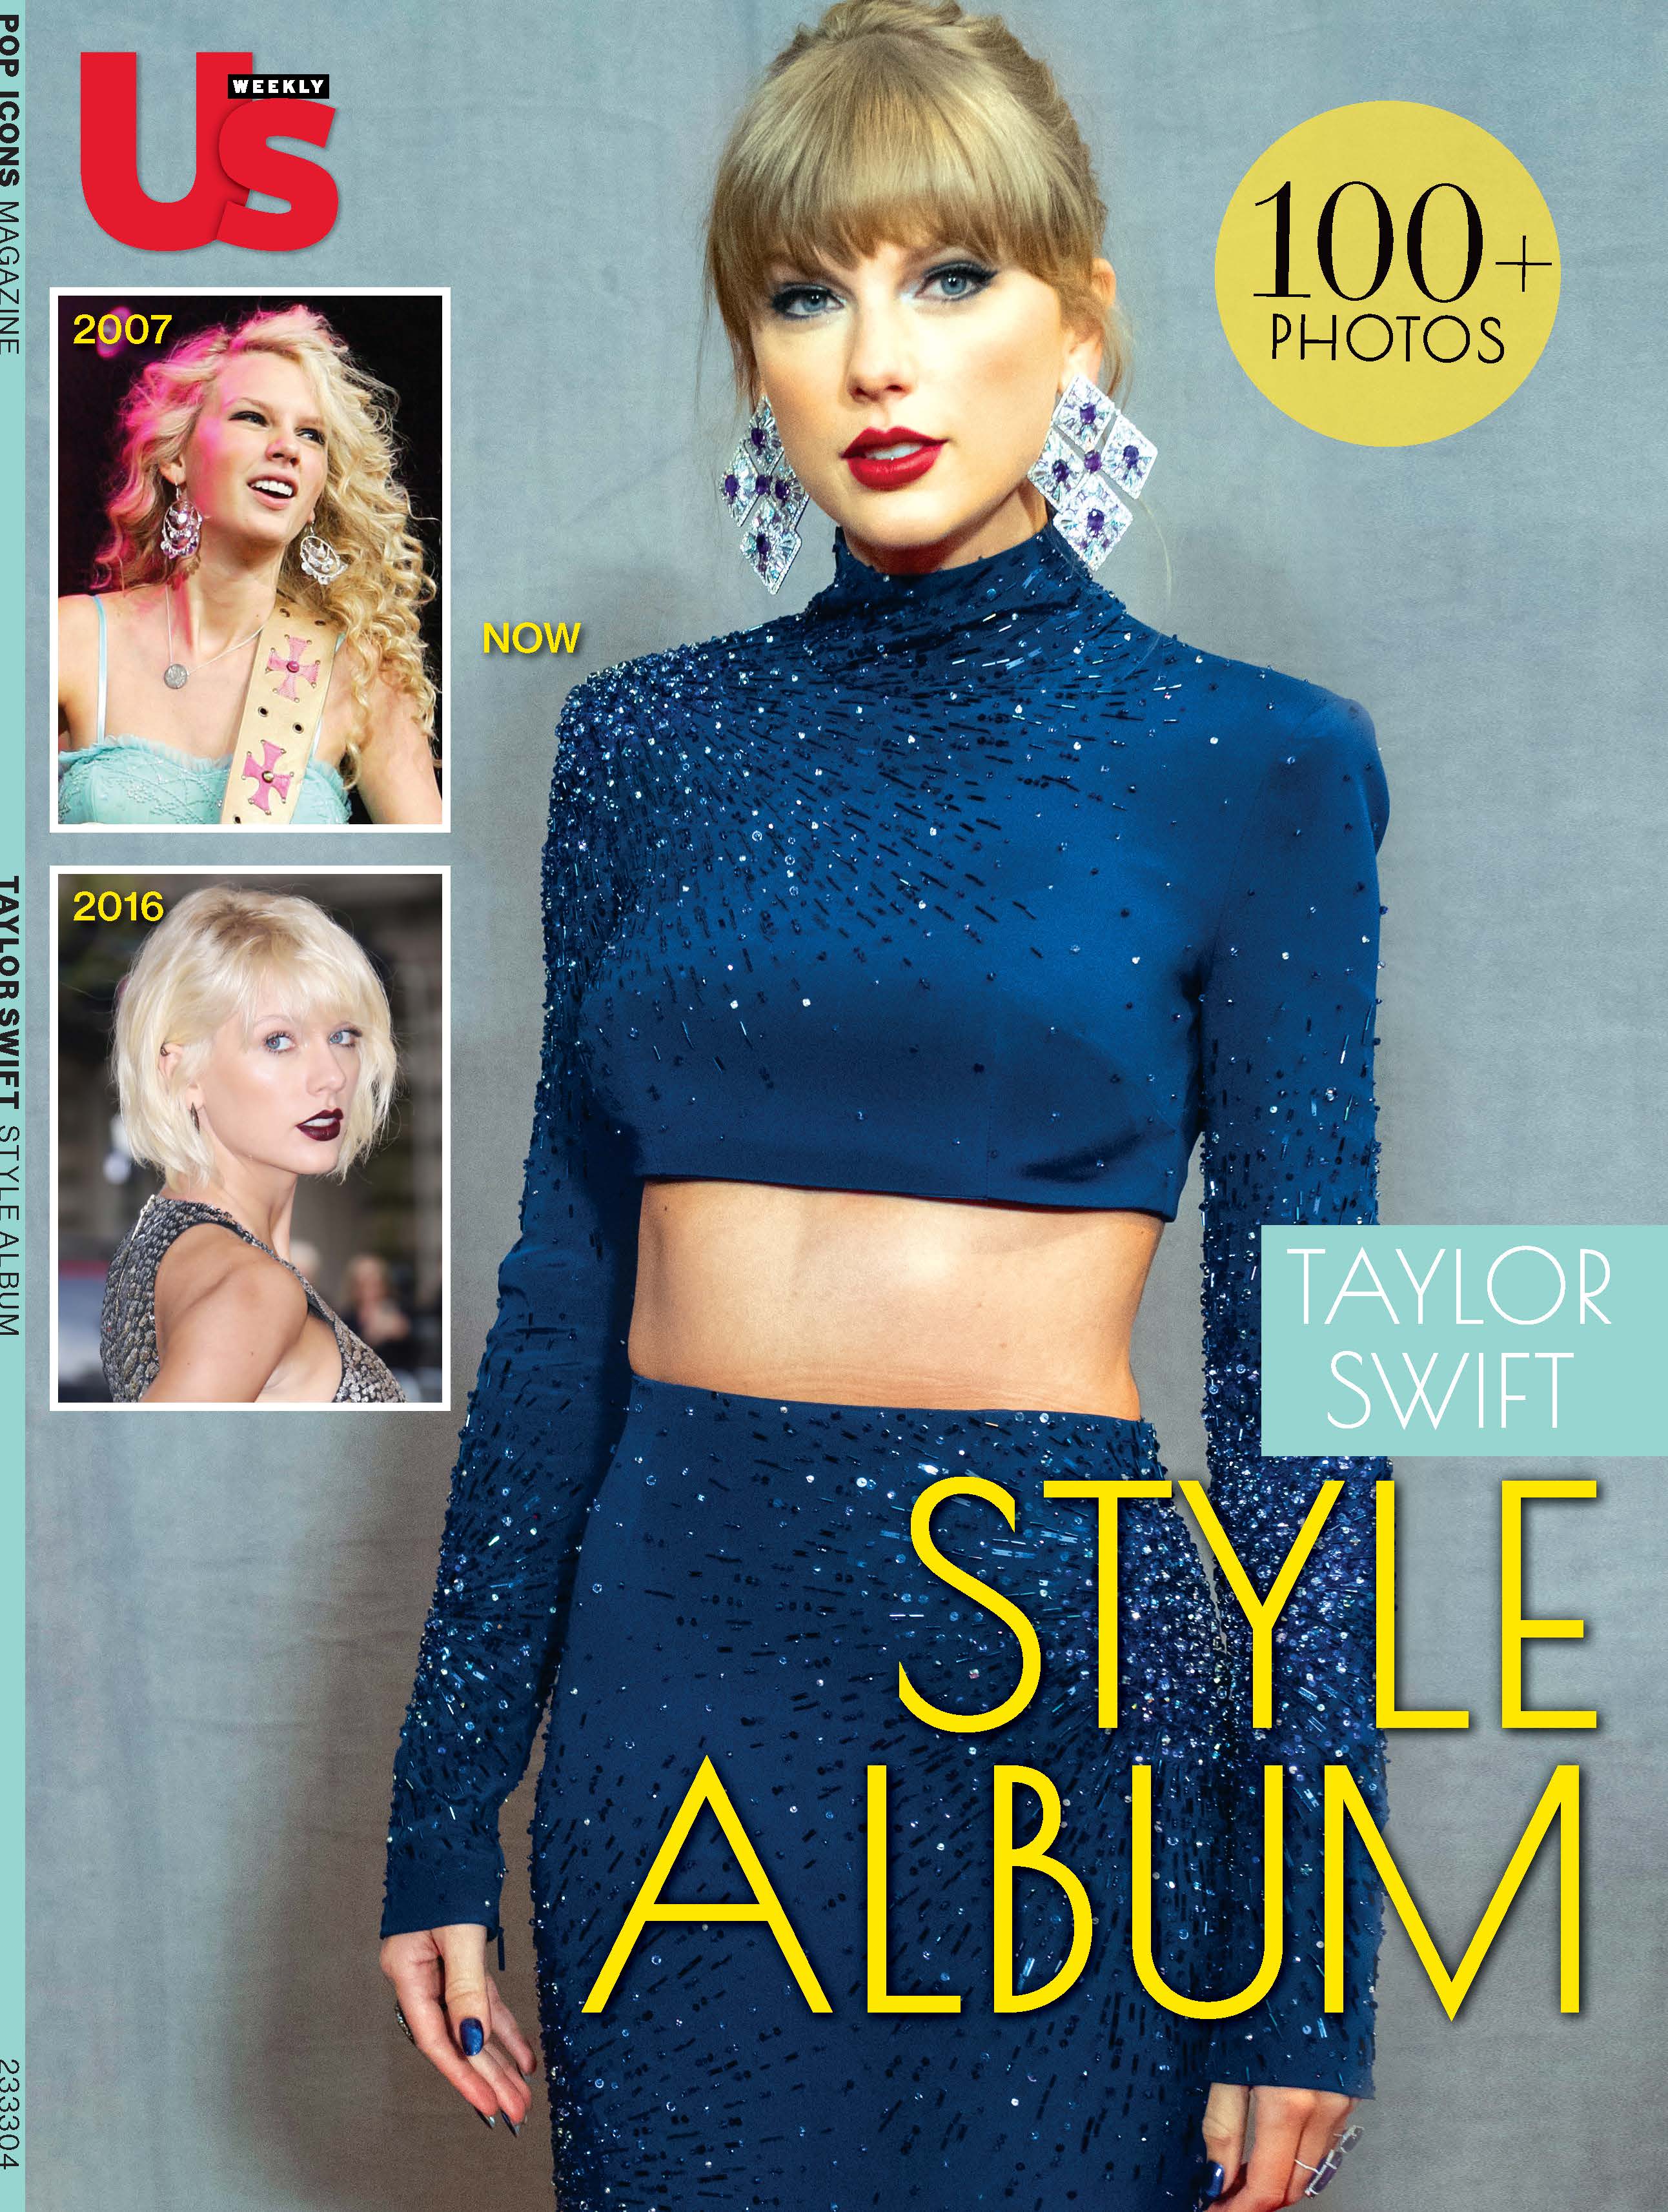 Stylish by Us Weekly